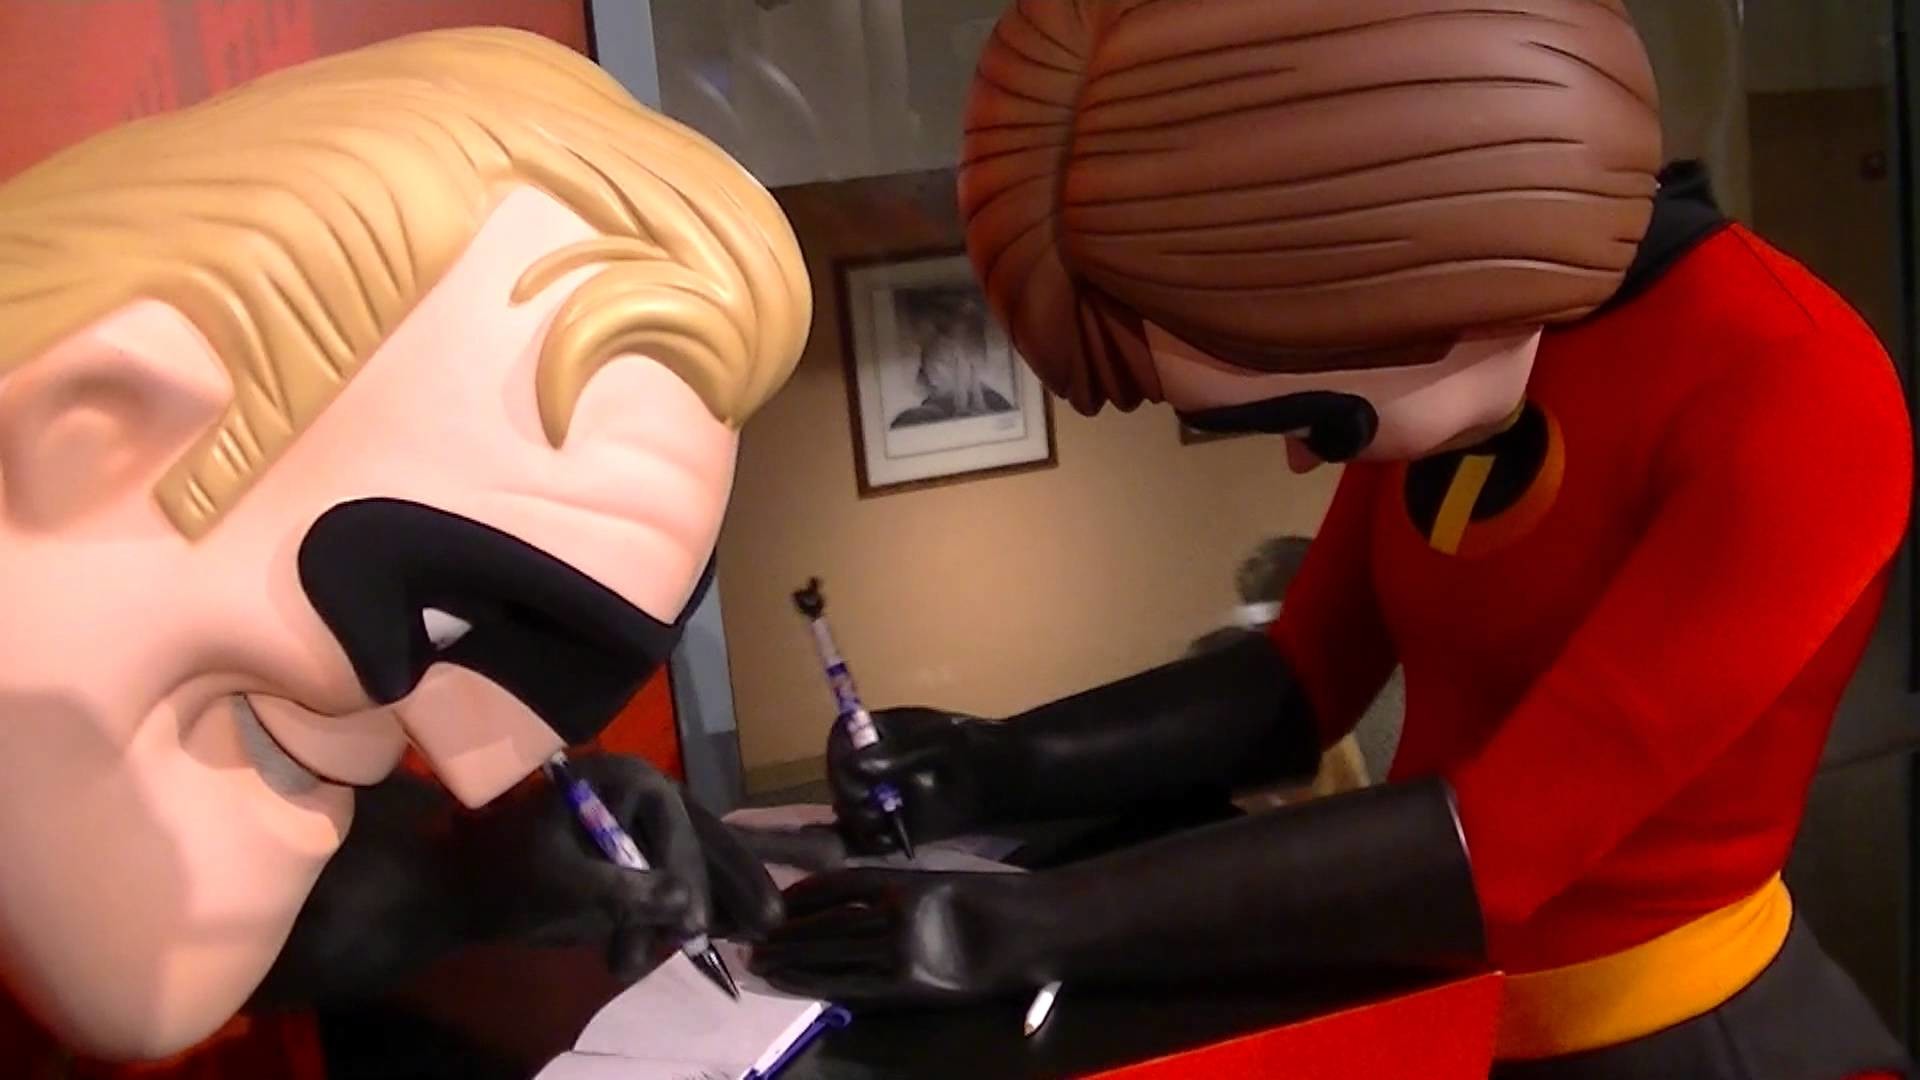 The incredibles have sex